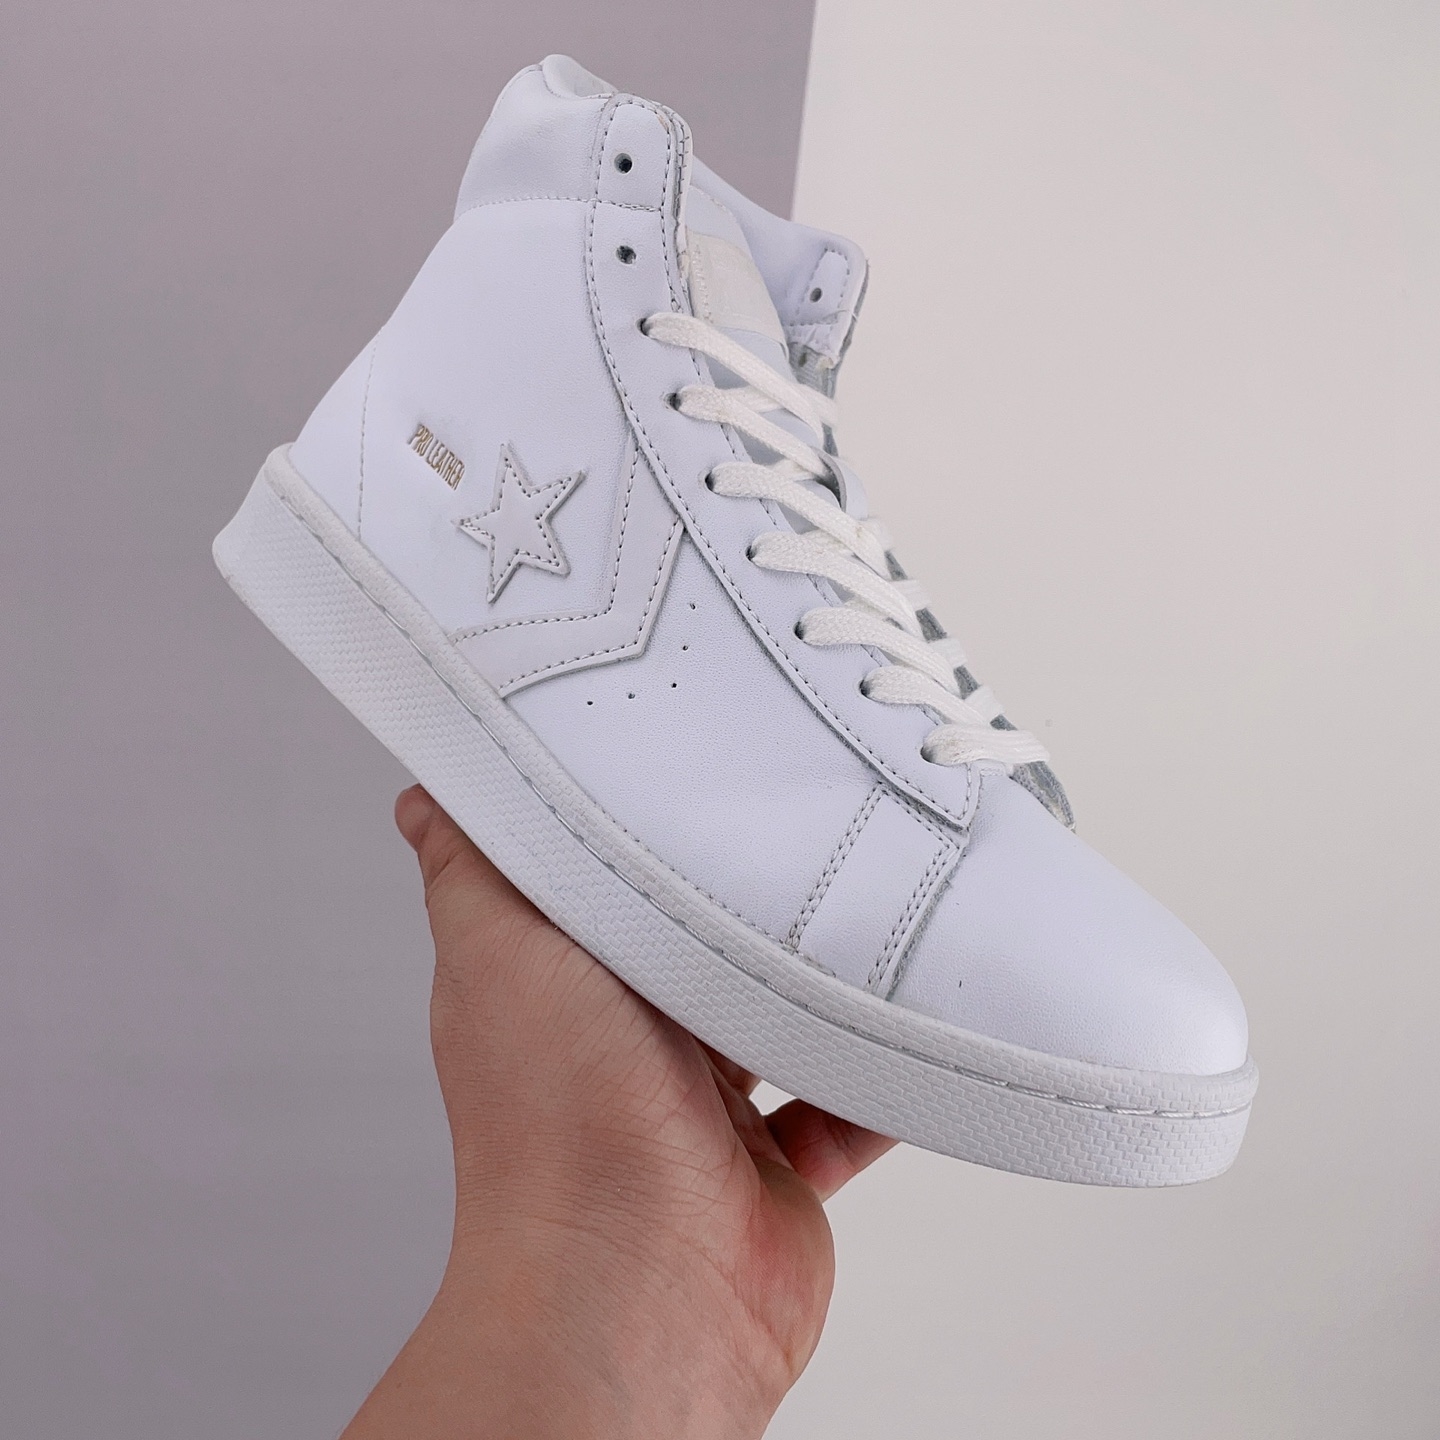 Converse Pro Leather Hi Triple White 166810C - Classic Style and Versatility